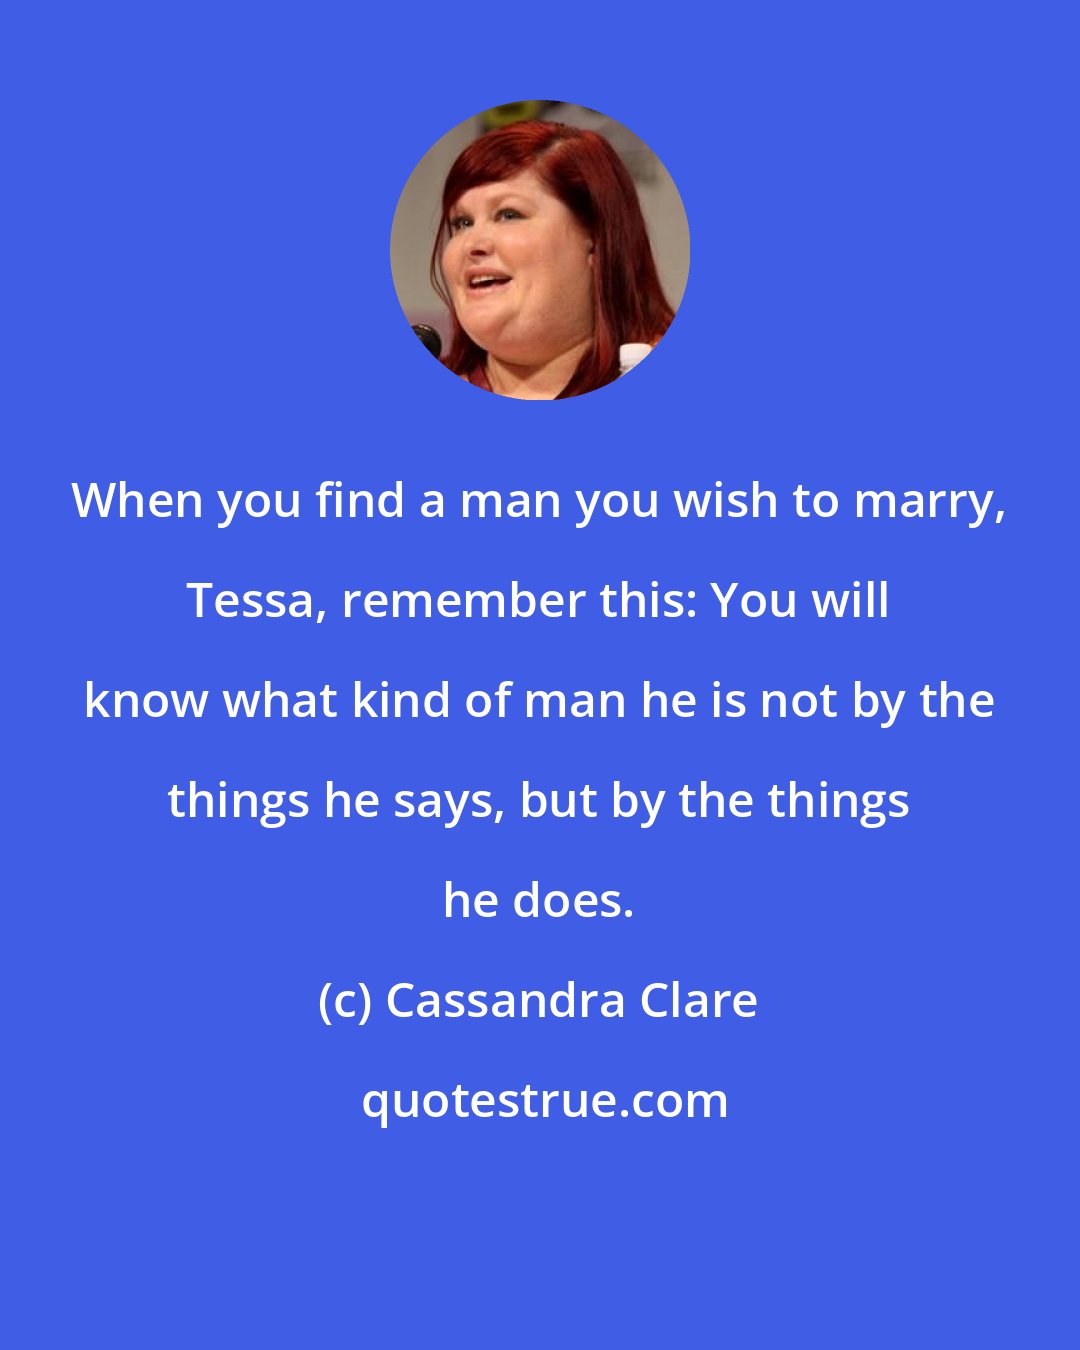 Cassandra Clare: When you find a man you wish to marry, Tessa, remember this: You will know what kind of man he is not by the things he says, but by the things he does.